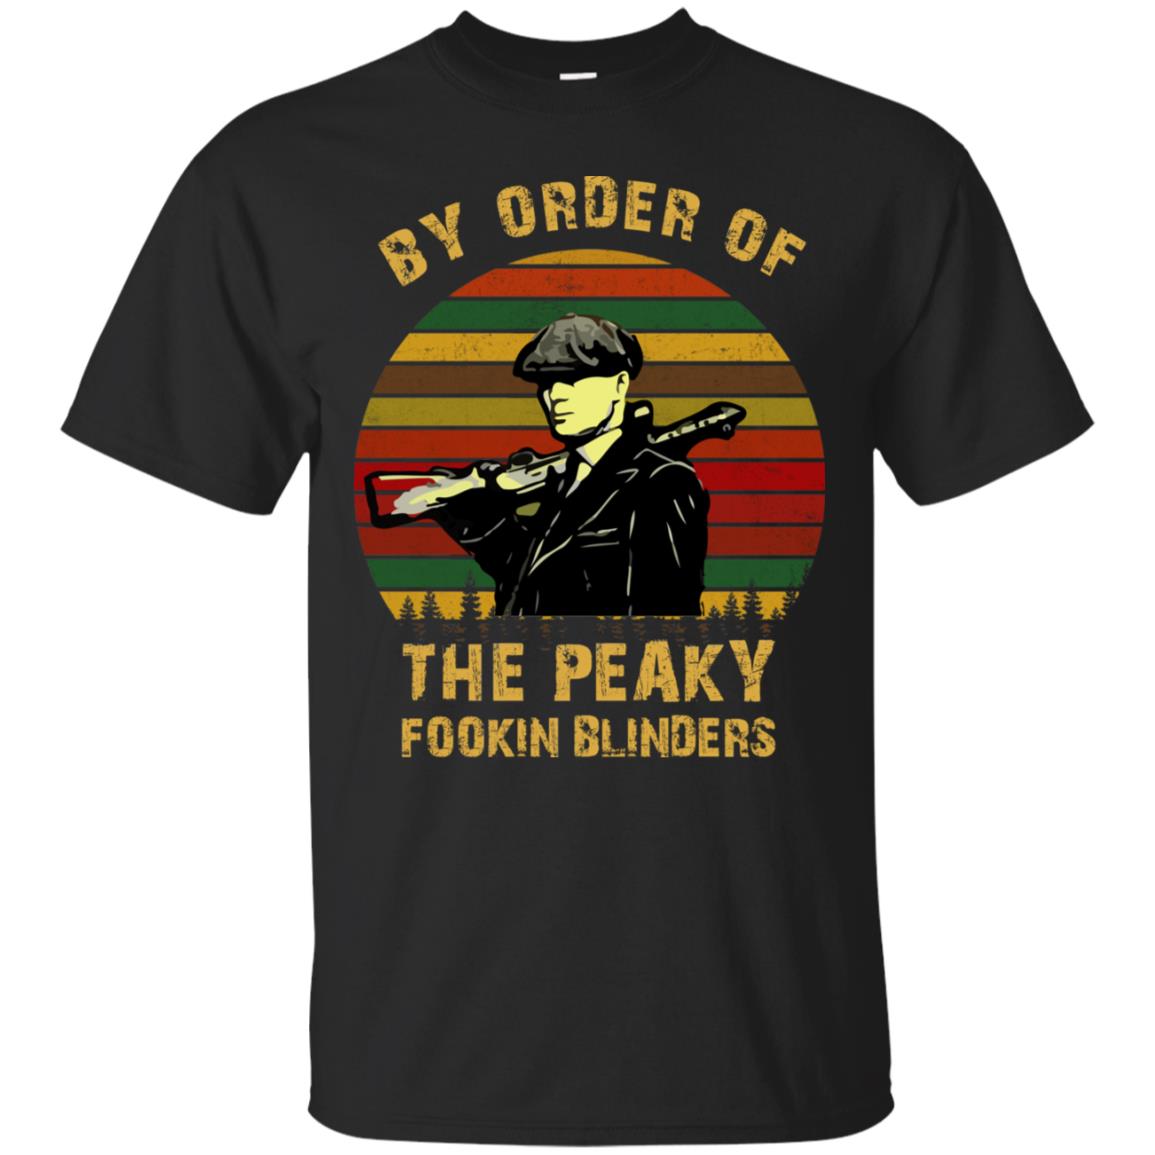 By Order of The Peaky fookin Blinders – Day T-Shirt